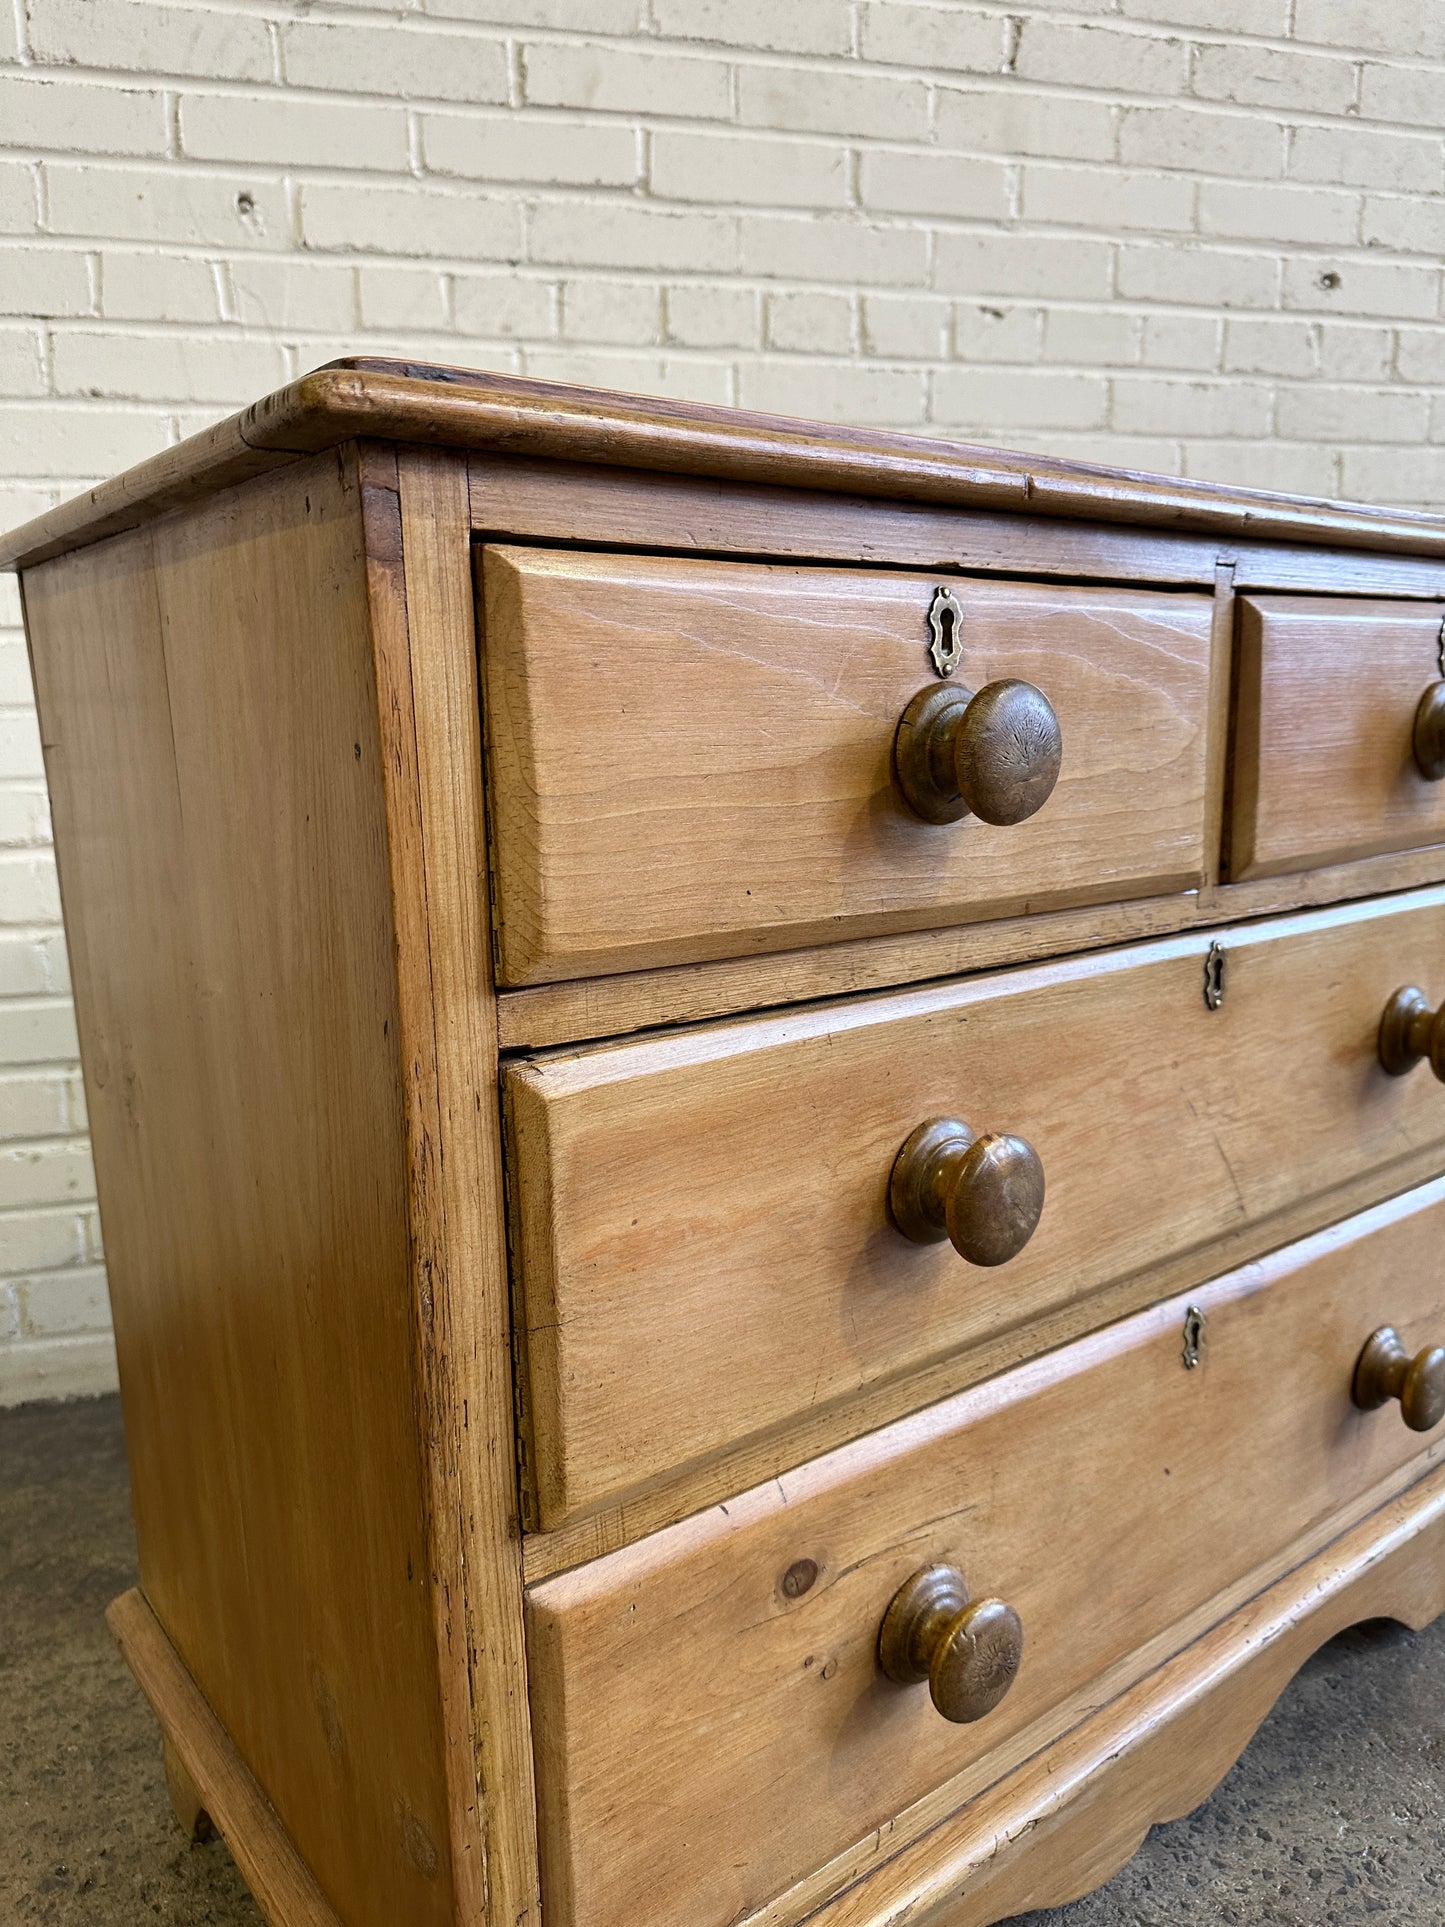 Antique Pine Chest of Drawers with Wavy Skirt, c. 1890